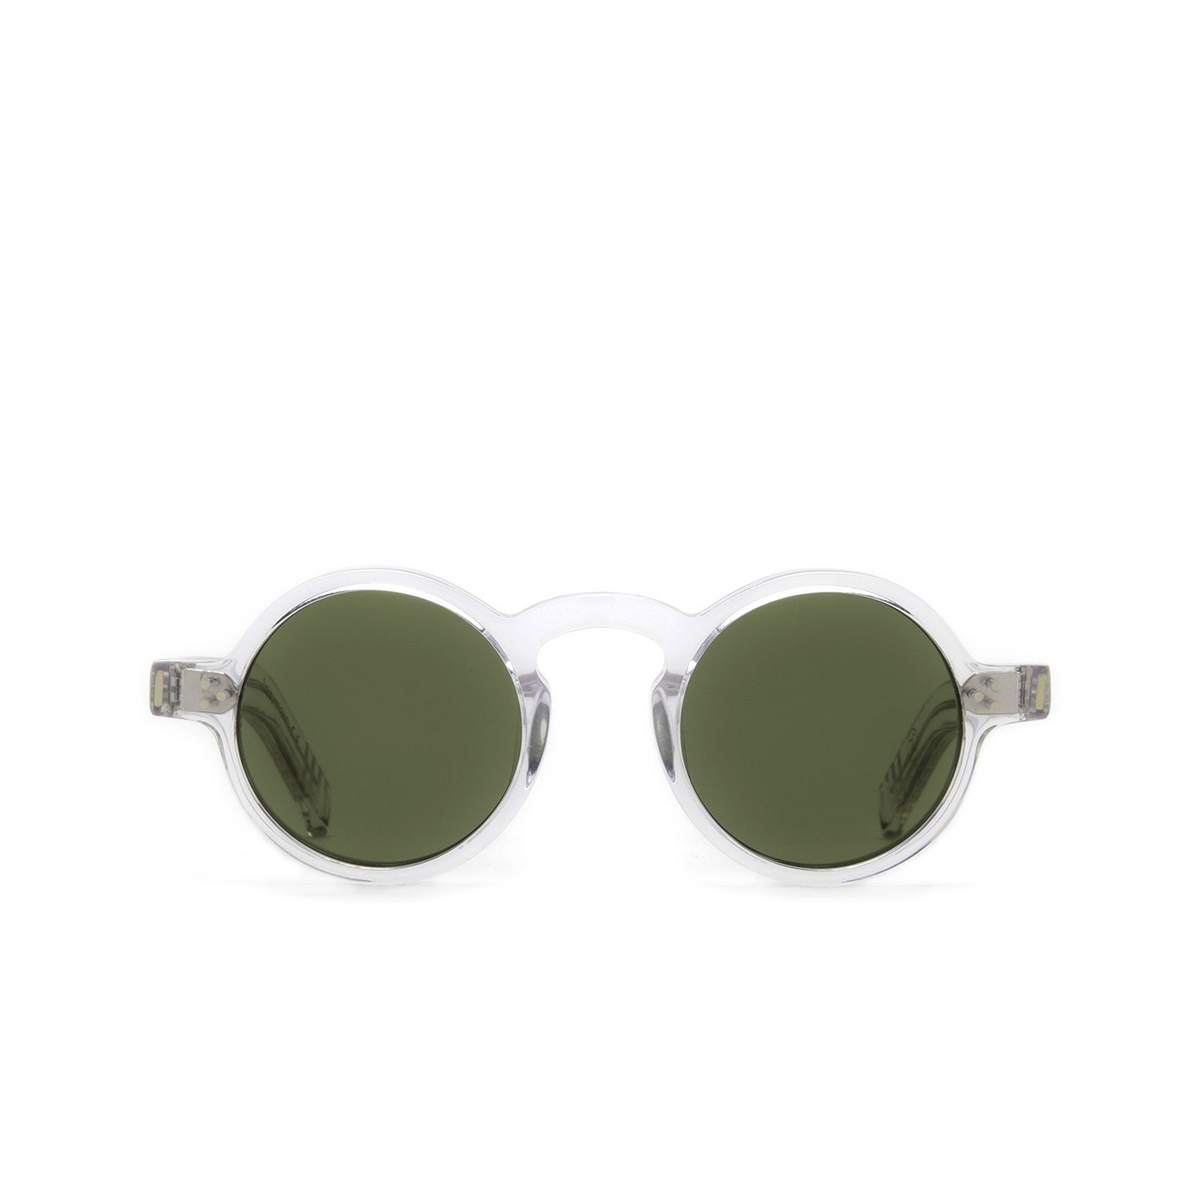 Lesca® Round Sunglasses: S.freud color Crystal 3 - front view.